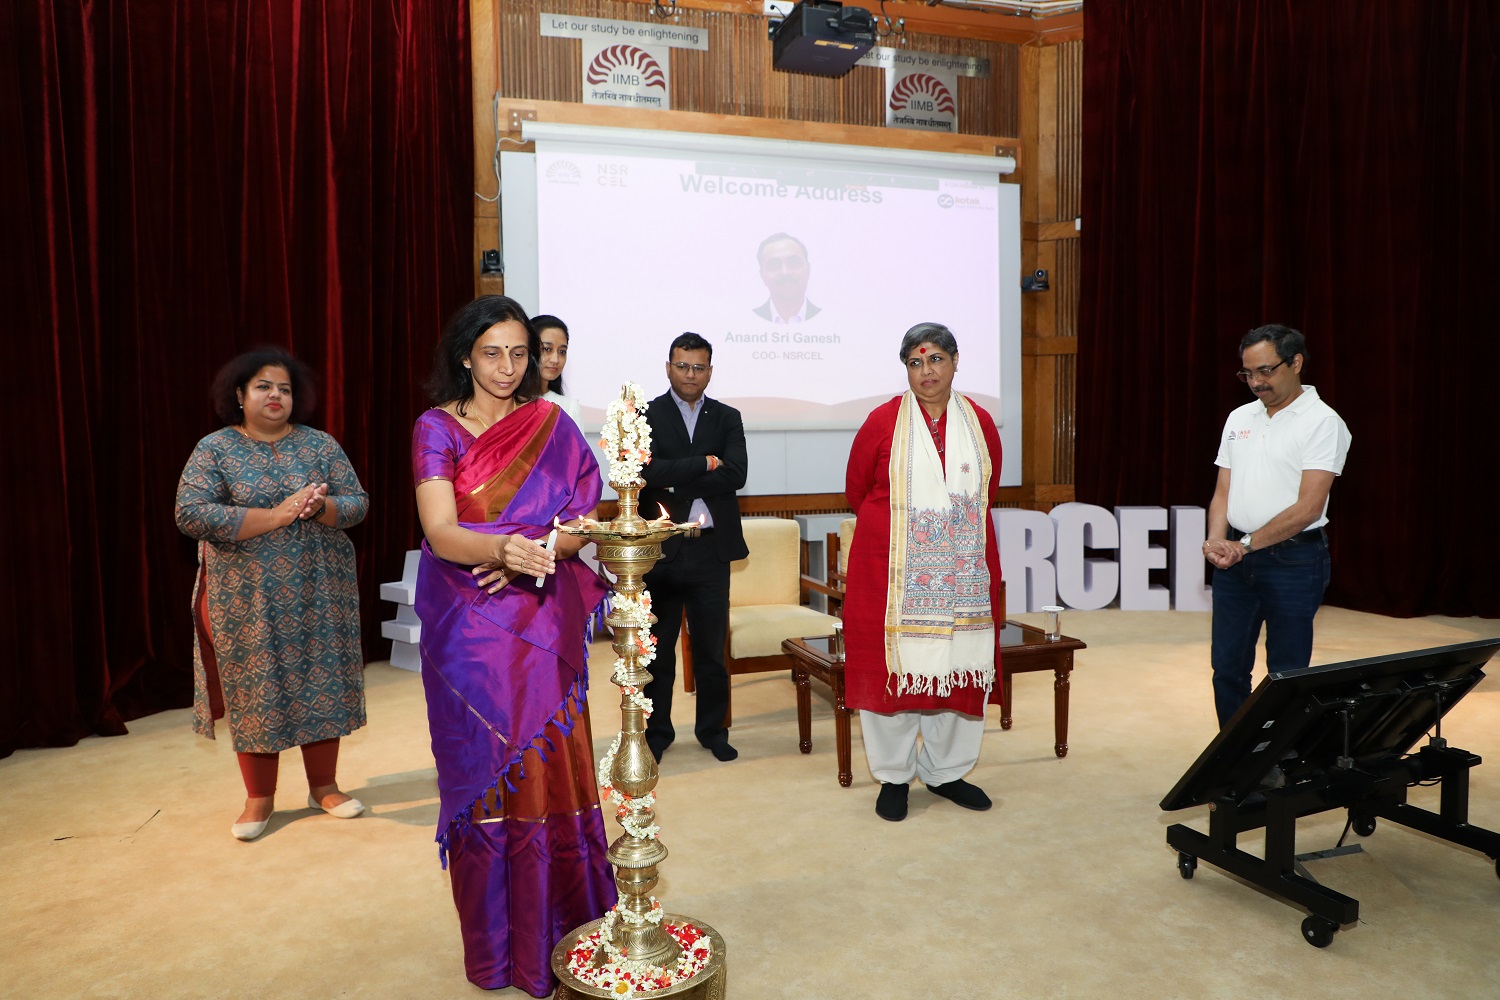 Prof. Srivardhini K Jha, Chairperson, NSRCEL, IIMB, lights the lamp to inaugurate NSRCEL’s Women Startup Program incubation launch, on 9th March 2023. Anand Sri Ganesh, COO, NSRCEL at IIMB, Malavika R Harita, Member of the Board of Governors at IIMB, Himanshu Nivsarkar, Executive Vice President & Head, CSR, Mabel Chacko, Co-Founder and COO, Open Financial Technologies, Ankita Pegu, Program Head, Women Startup Program, NSRCEL, IIMB, look on.